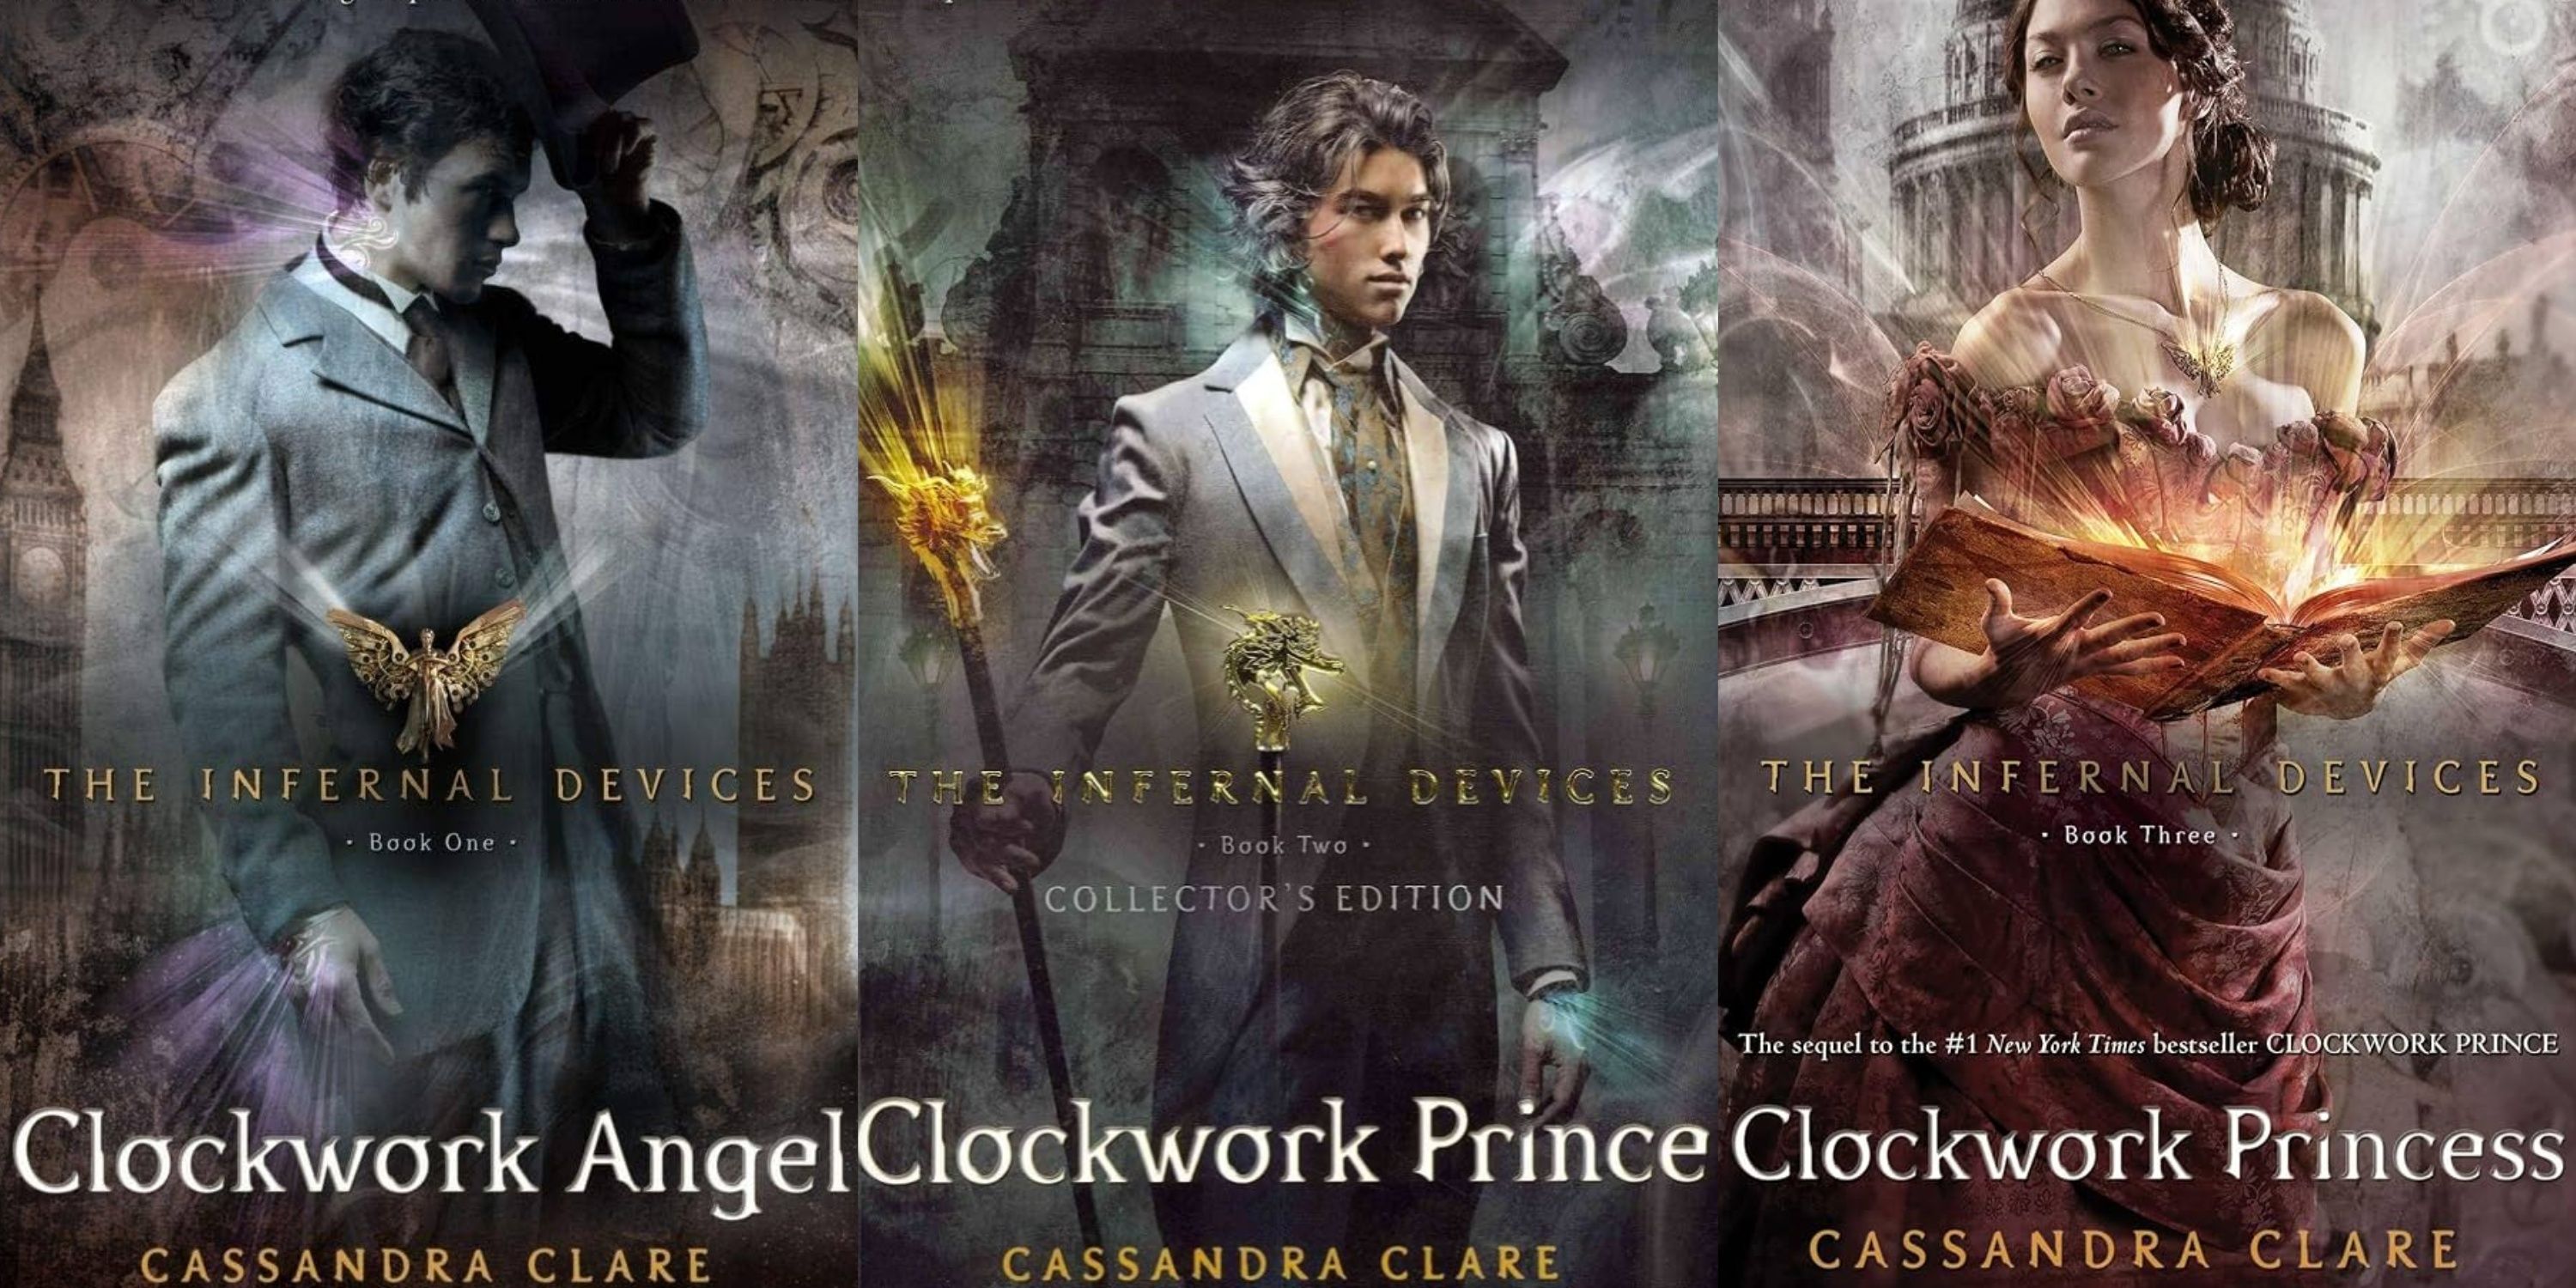 The covers of Cassandra Clare's Infernal Devices books